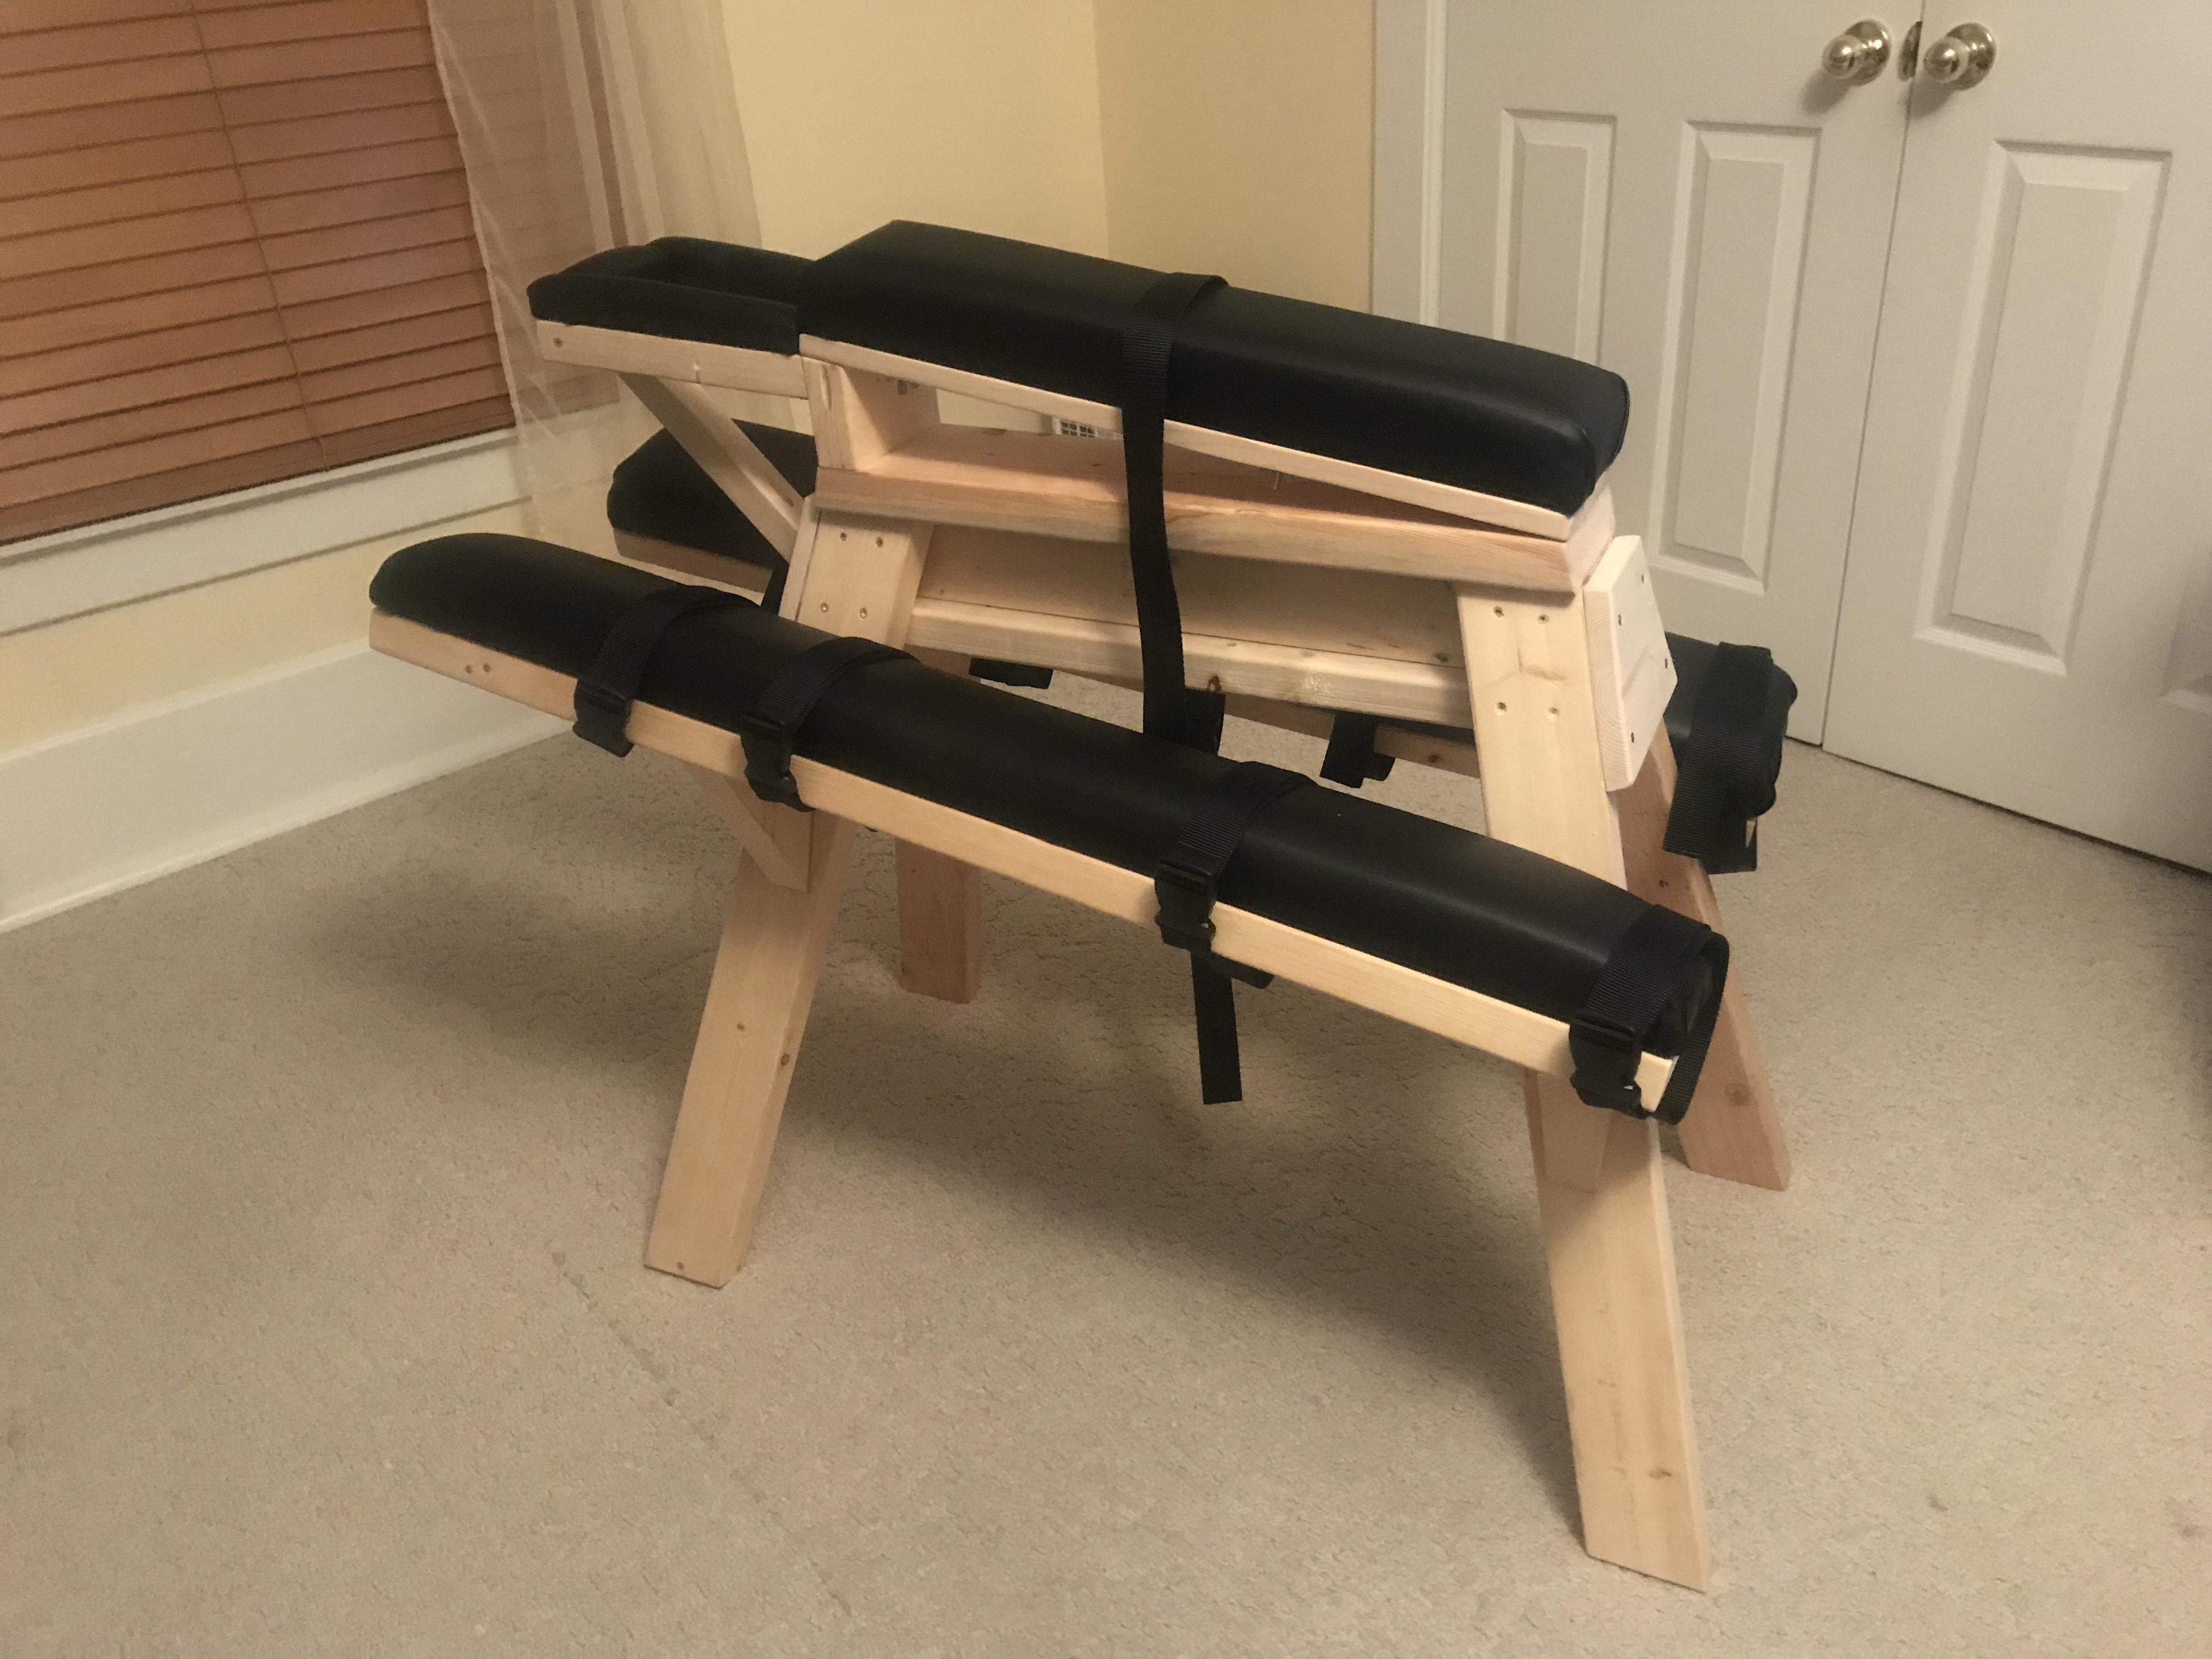 First time poster, long time follower. Not quite the versa horse but.... Our homemade spanking bench